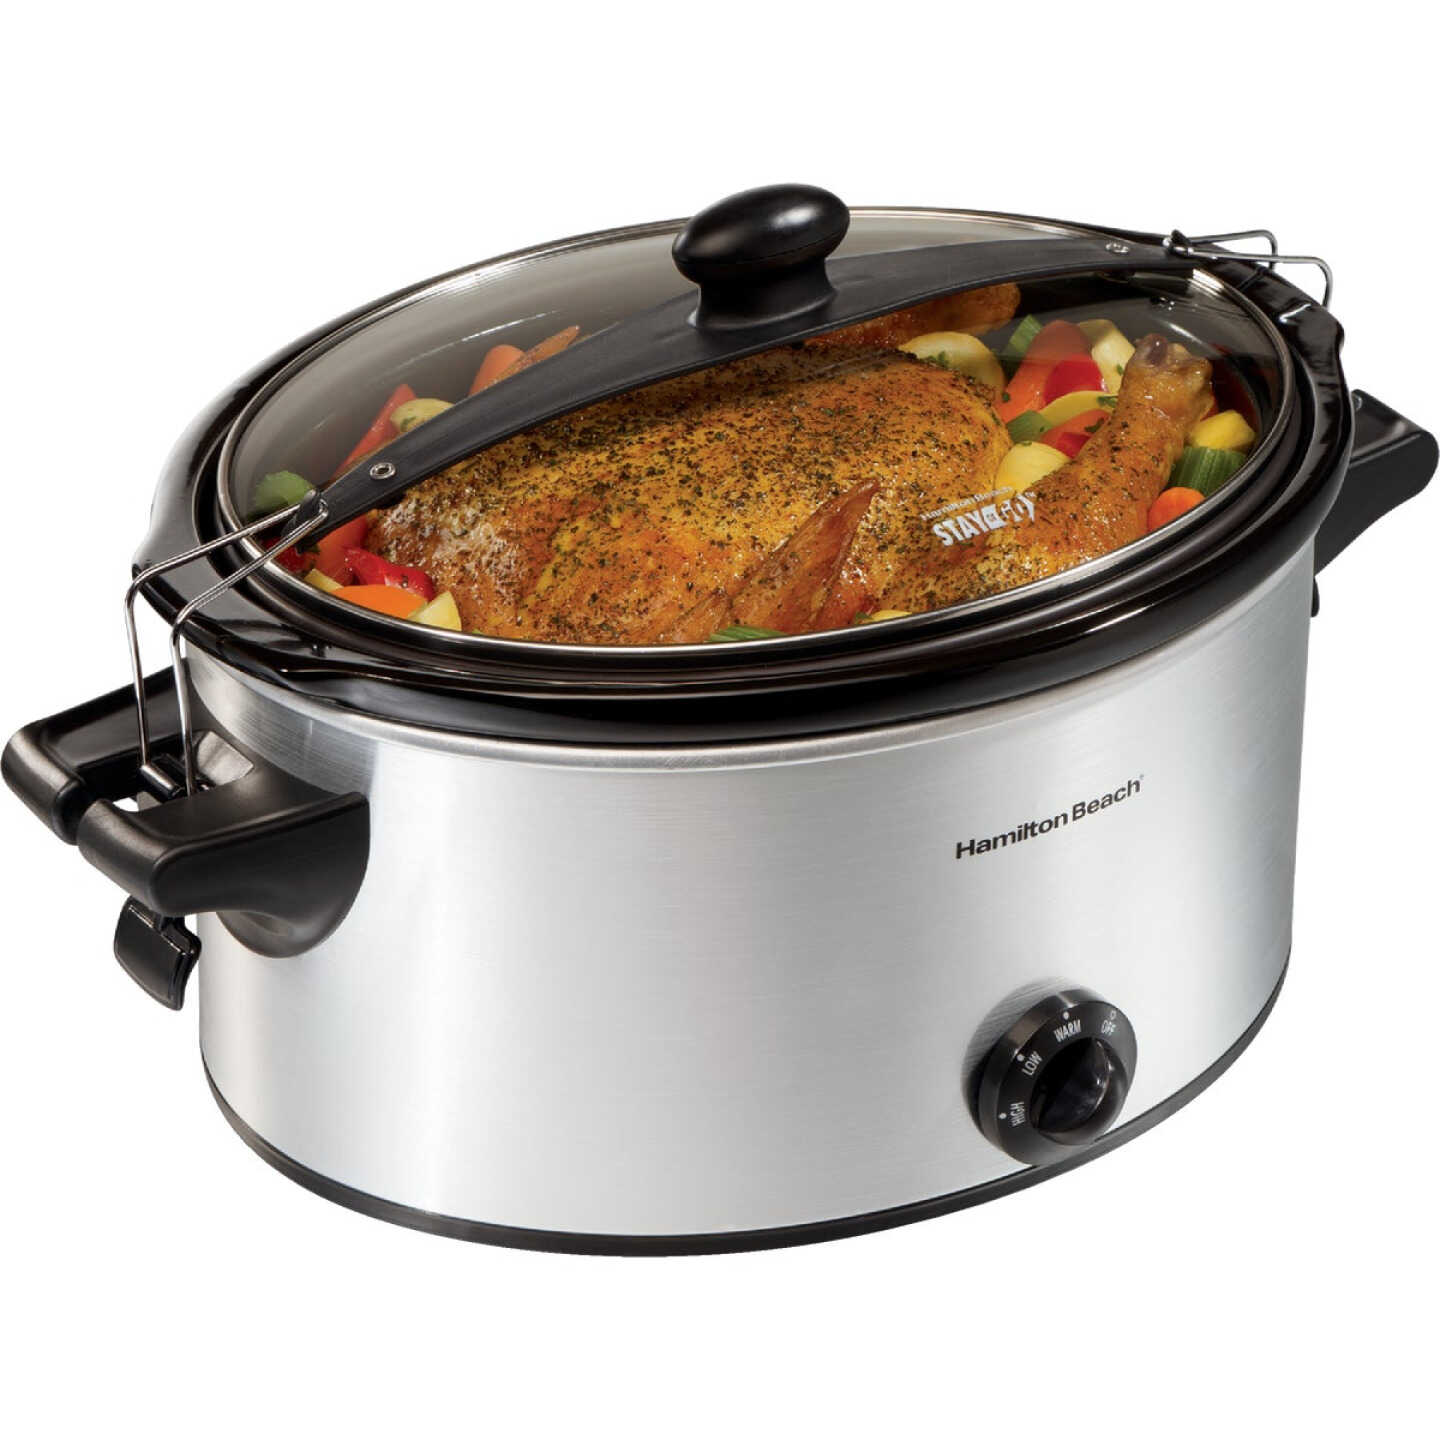 Crock-Pot 6-Quart Stainless Steel Oval Slow Cooker at